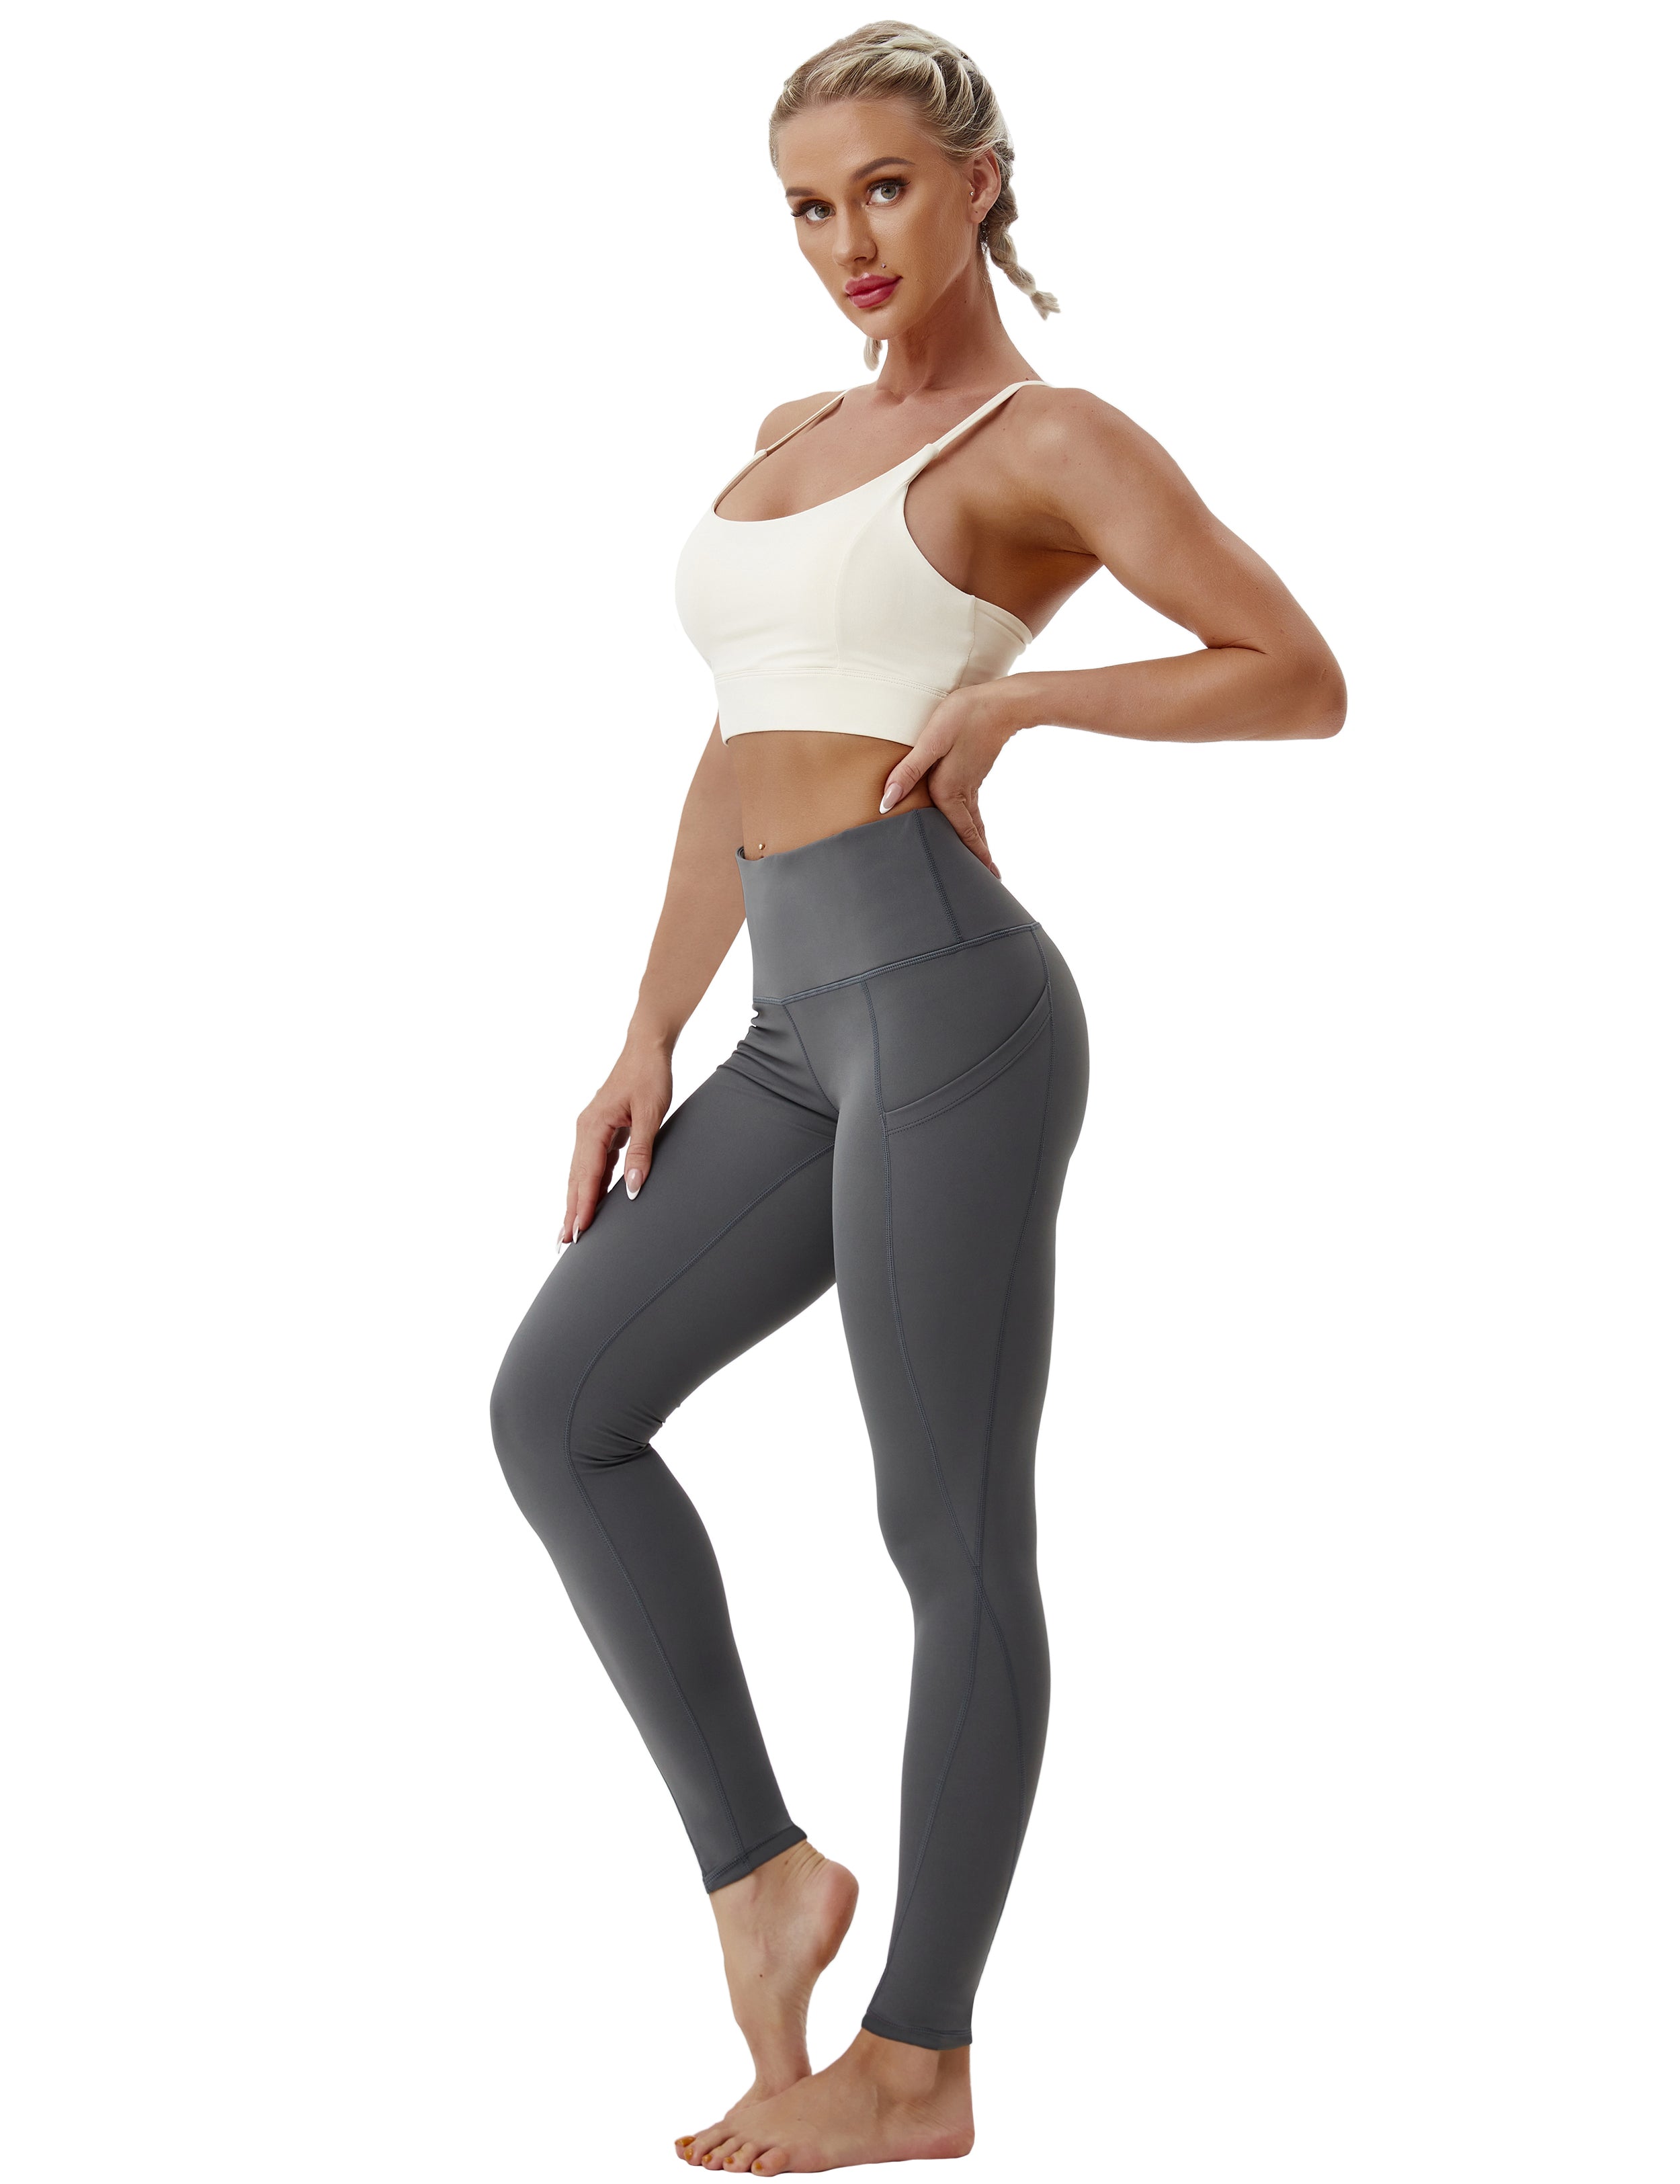 High Waist Side Pockets Biking Pants shadowcharcoal 75% Nylon, 25% Spandex Fabric doesn't attract lint easily 4-way stretch No see-through Moisture-wicking Tummy control Inner pocket